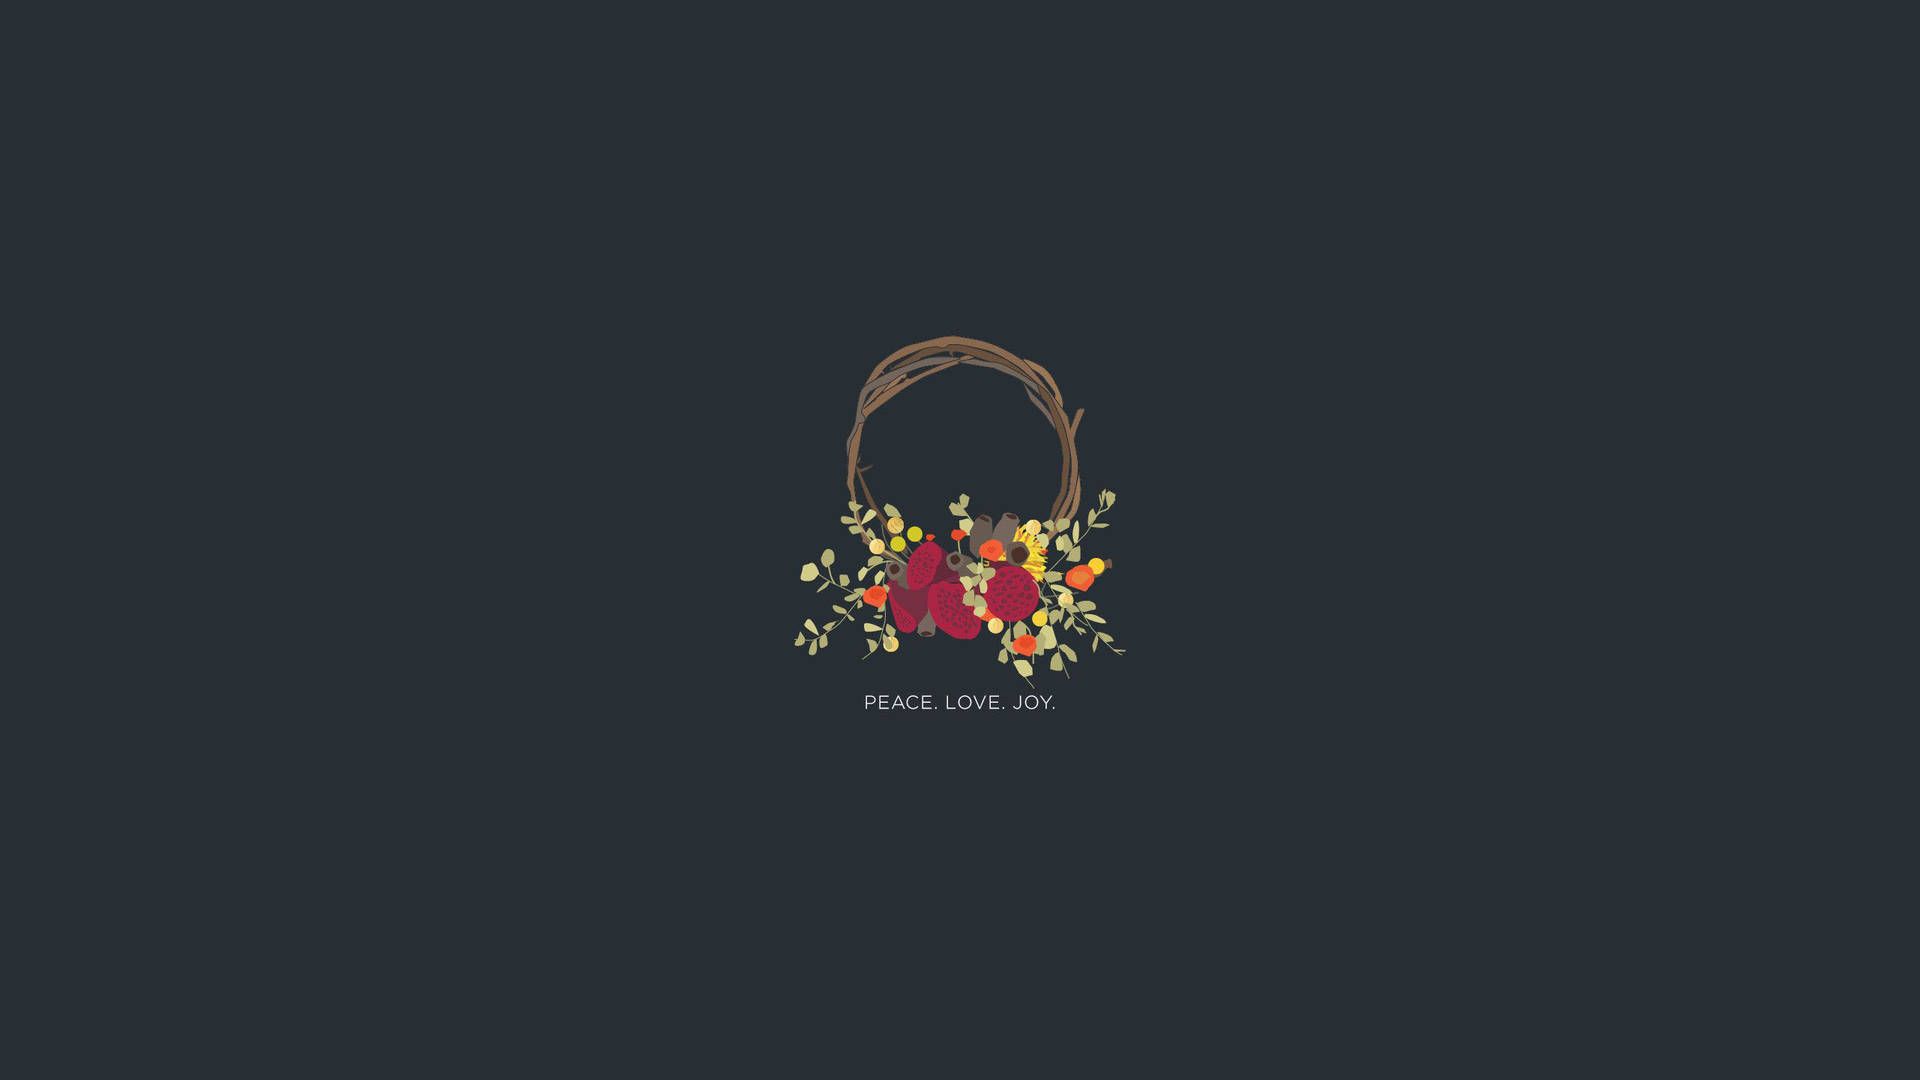 Dark wallpaper with a simple wreath of flowers - Peace